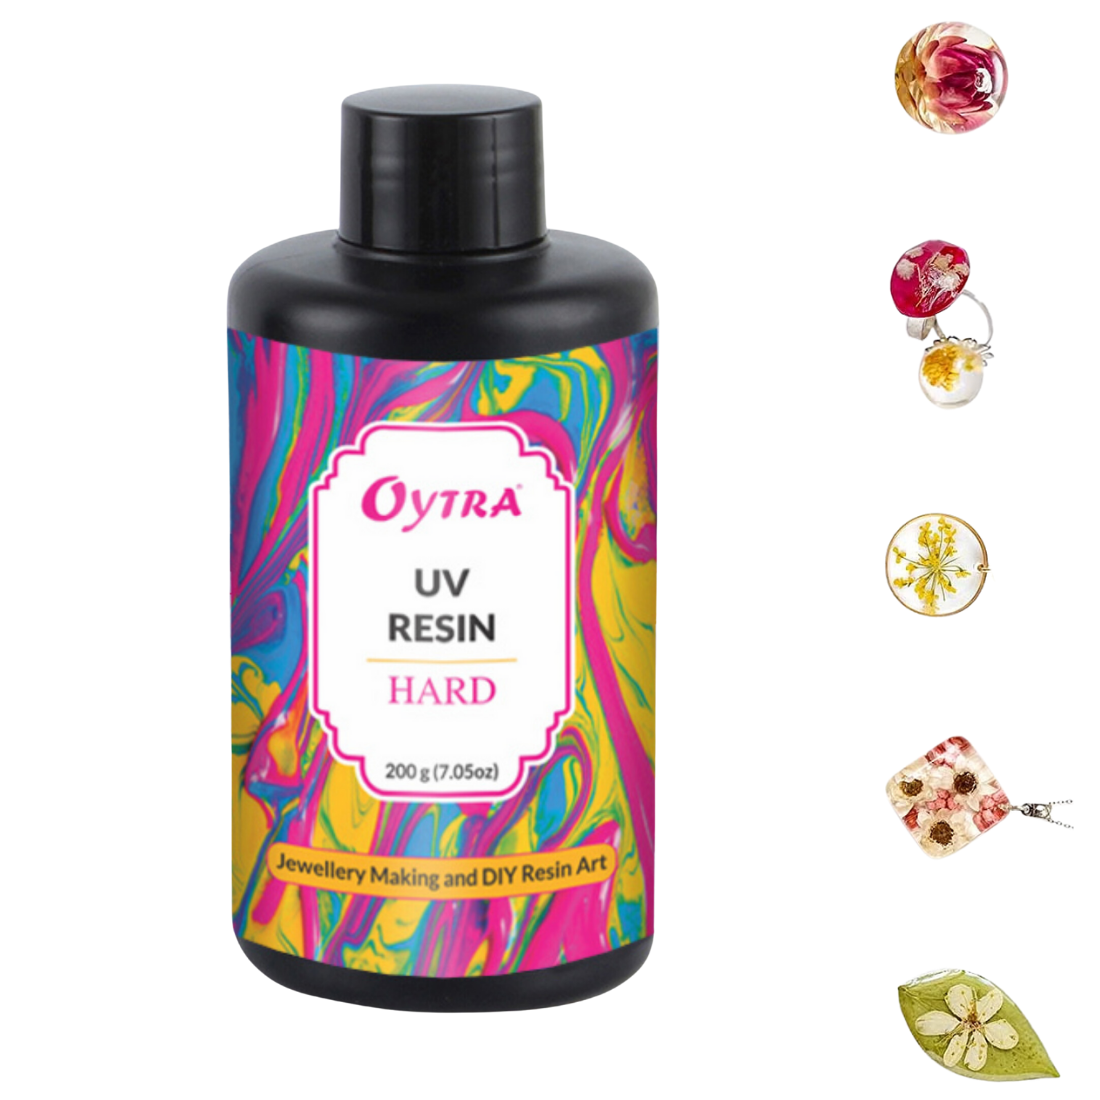 Oytra 2kg Uv Resin Hard Clear Glossy Finish for Artists and Professionals Polymer Clay Gloss DIY Jewelry Craft Decoration Casting Coating